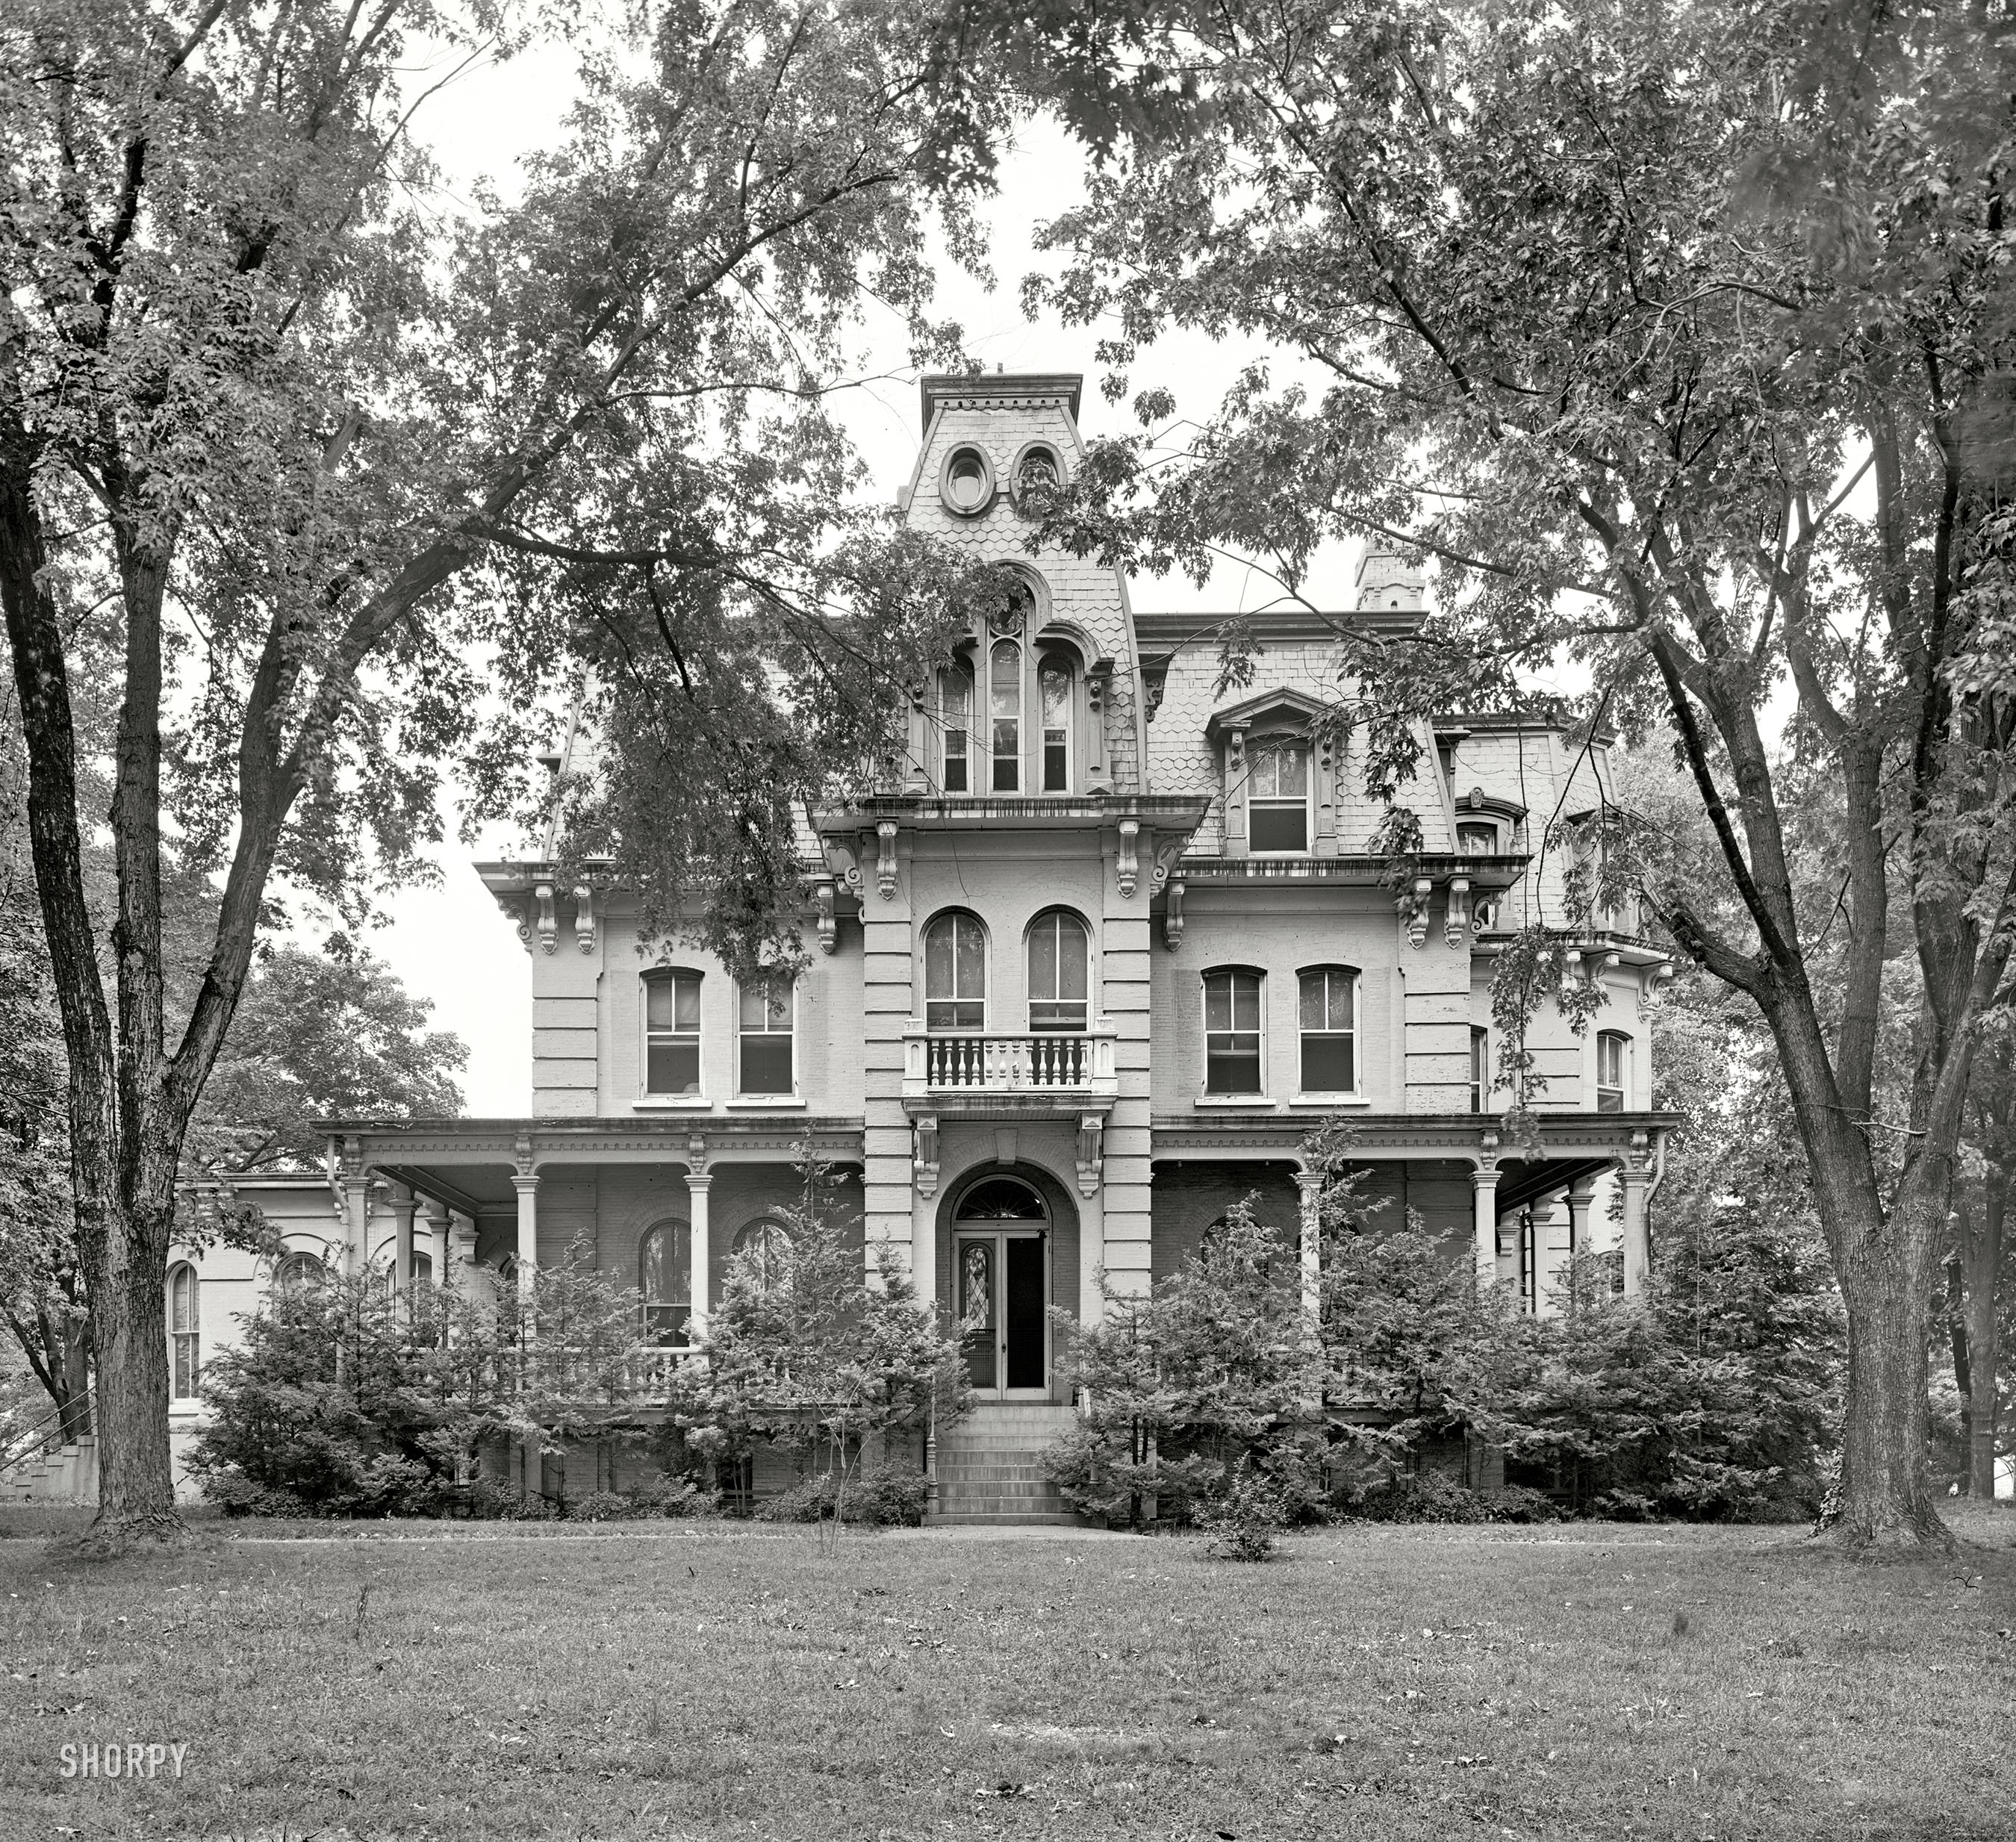 &nbsp; &nbsp; &nbsp; UPDATE: The location is the old Maplewood estate near Lewinsville in Fairfax County, Virginia; the 1874 Second Empire mansion, at 7676 Old Springhouse Road in what's now McLean, was known as Villa Nuova. The residence was demolished in 1970; whatever connection it might have had to Woodrow Wilson is unknown. Hat tip to Shorpy member Wiggy.
Circa 1925. "Woodrow Wilson house." No other information provided. (Not pictured: Tweety and Sylvester in the parlor, going at it hammer and tongs.) National Photo Company Collection glass negative. View full size.